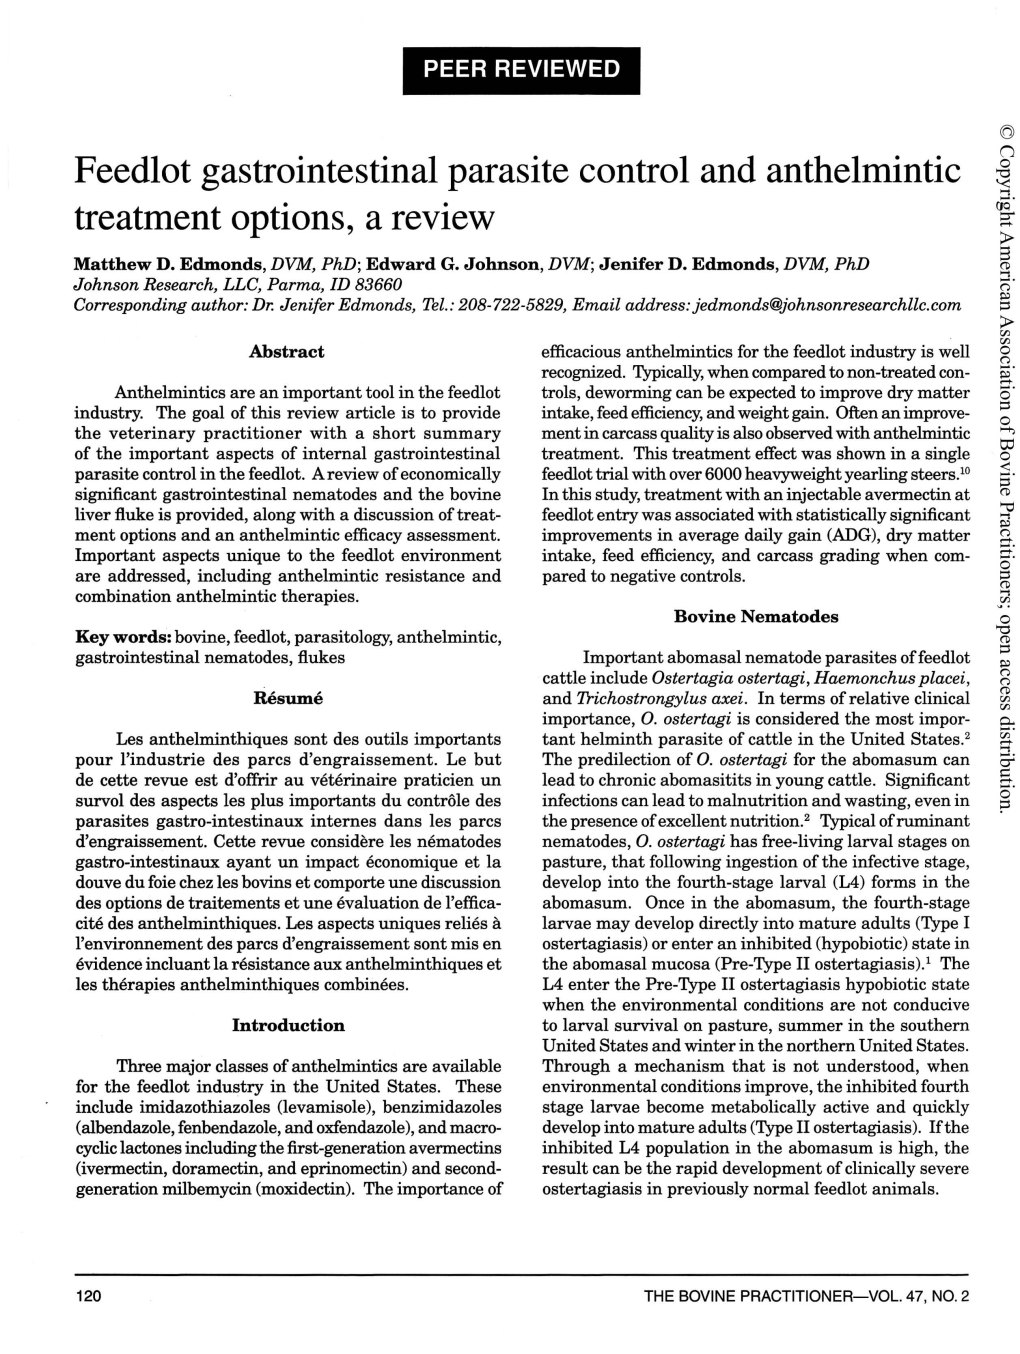 Feedlot Gastrointestinal Parasite Control and Anthellllintic Treatment Options, a Review